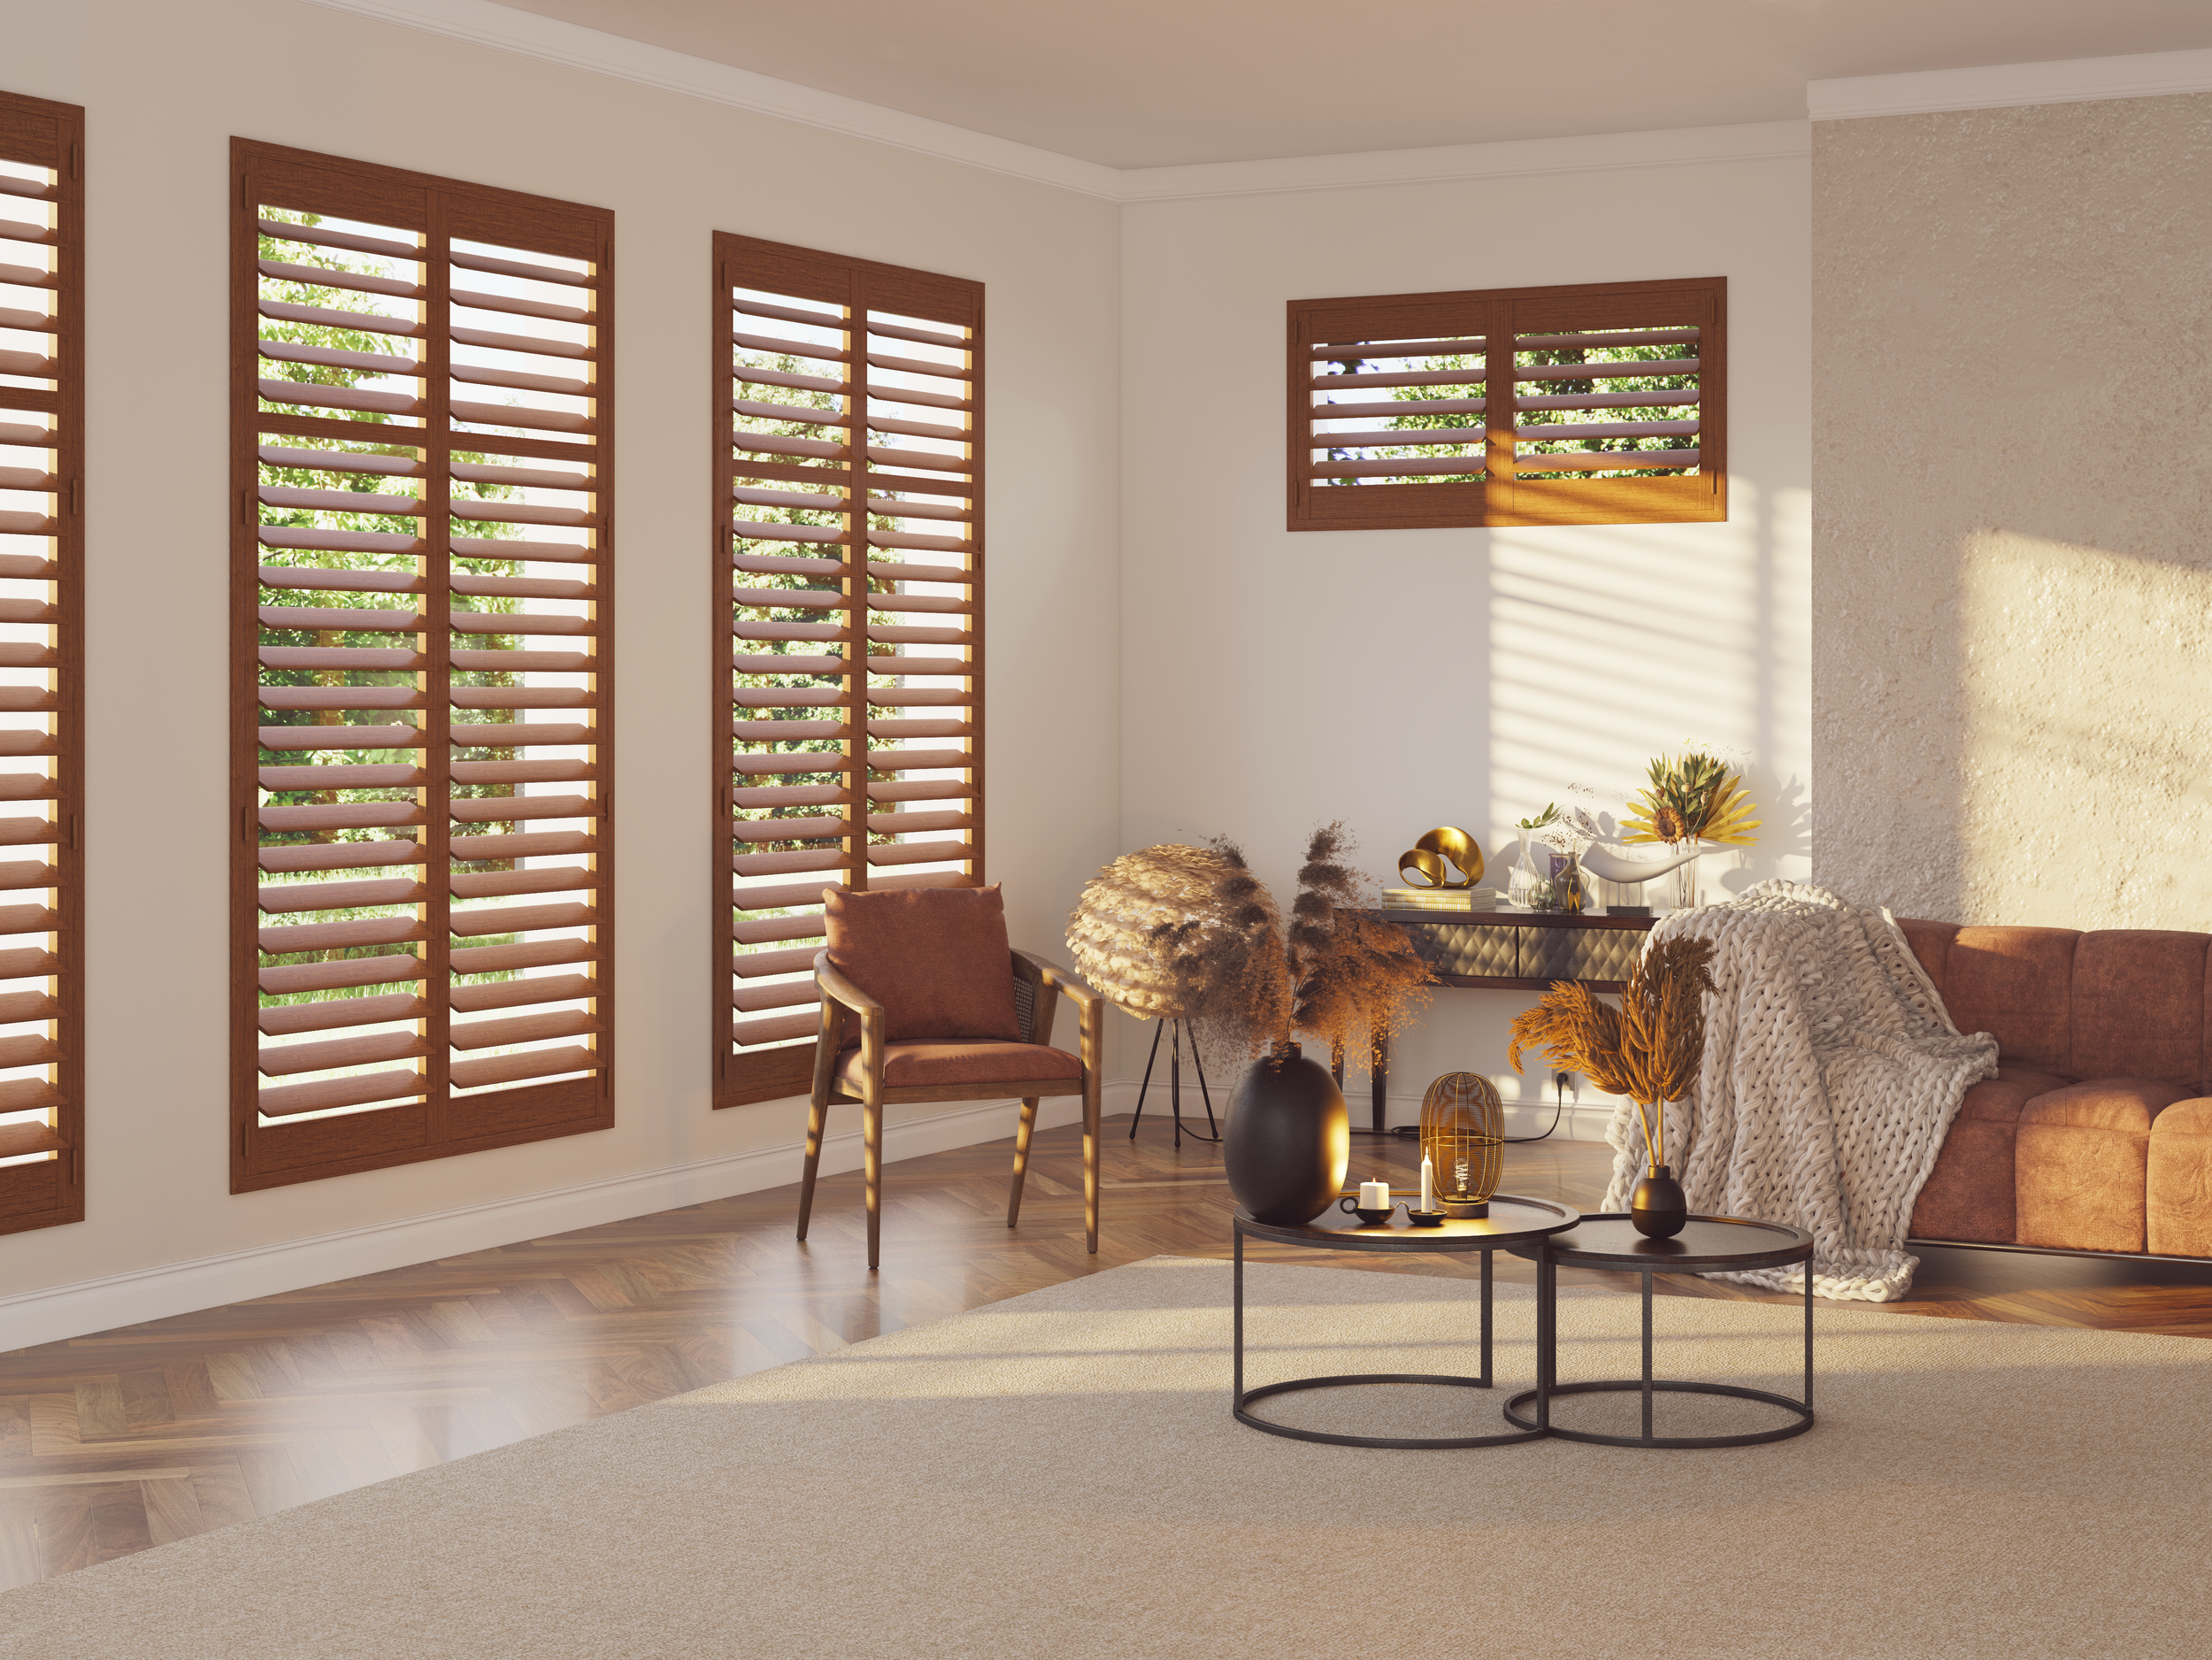 The Versatility of Wood in Plantation Shutters